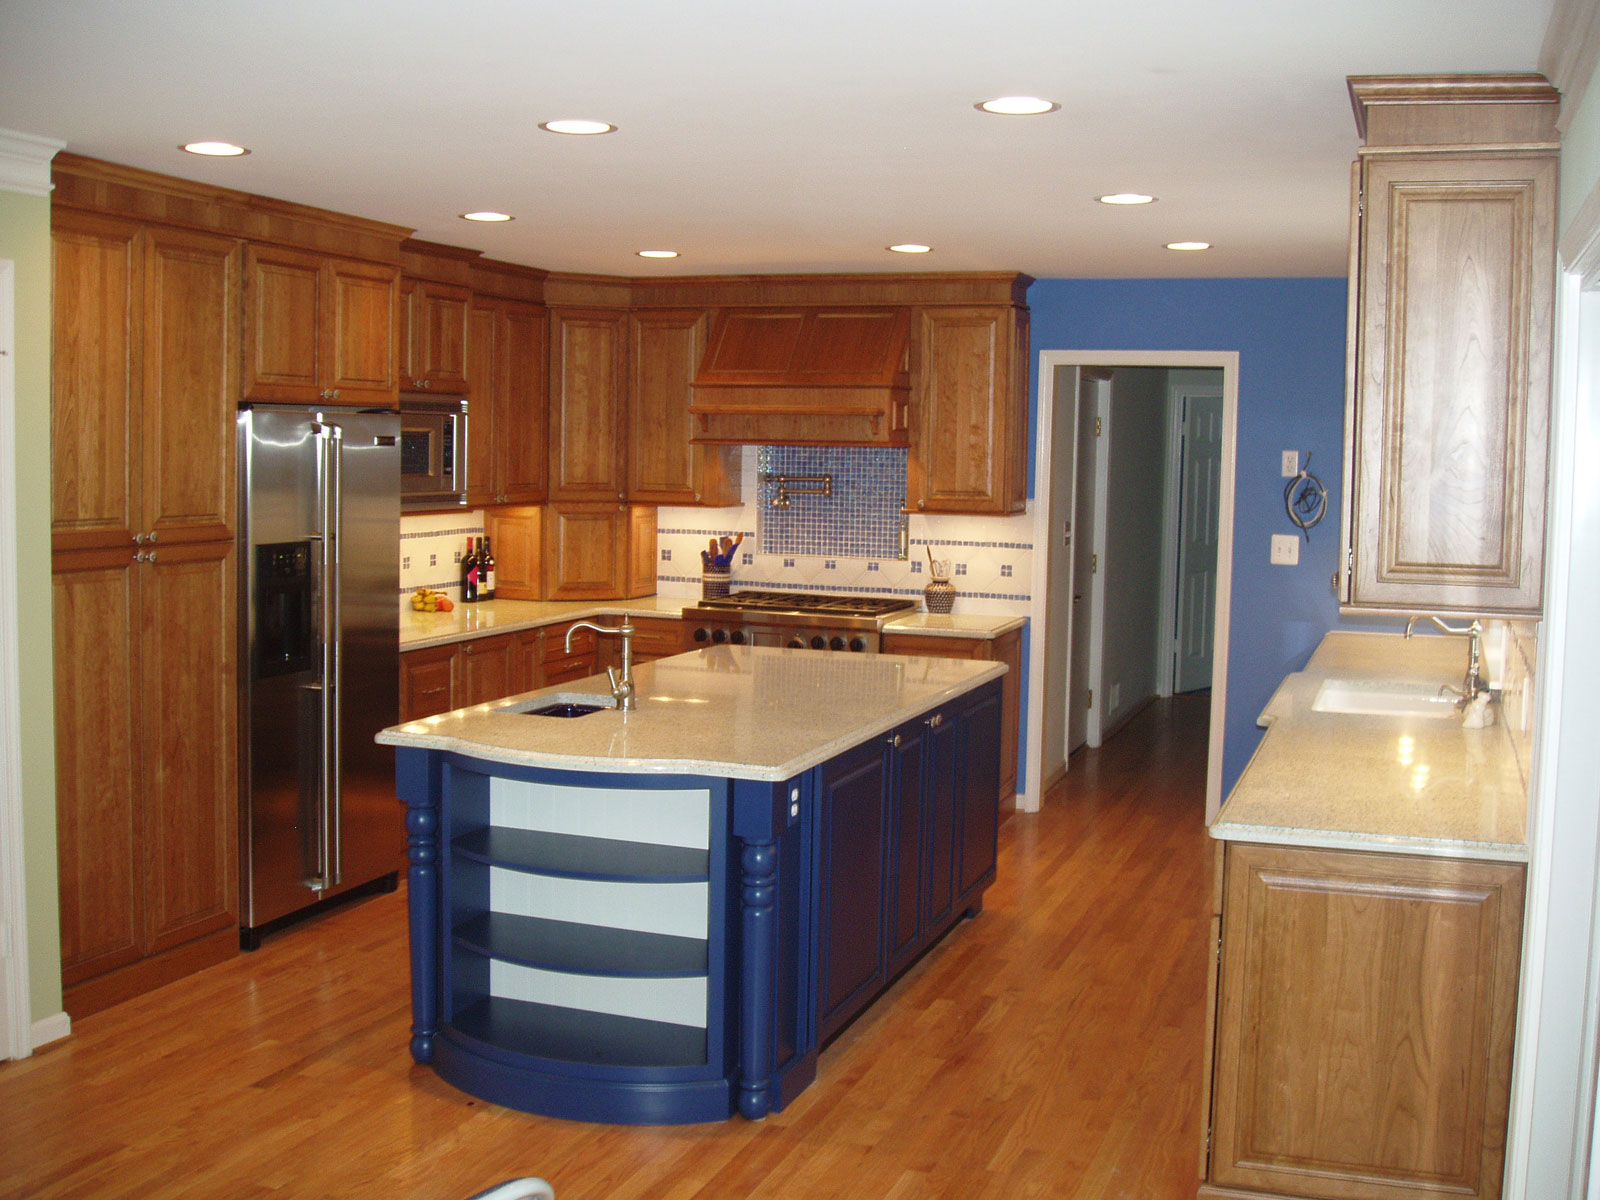 Blue Kitchen Combined Excellent Blue Kitchen Island Ideas Combined With White Marble On Top Design Furnished With Sink And Completed With Silver Refrigerator On Cupboard Kitchen Get The Beautiful Kitchen Island Ideas